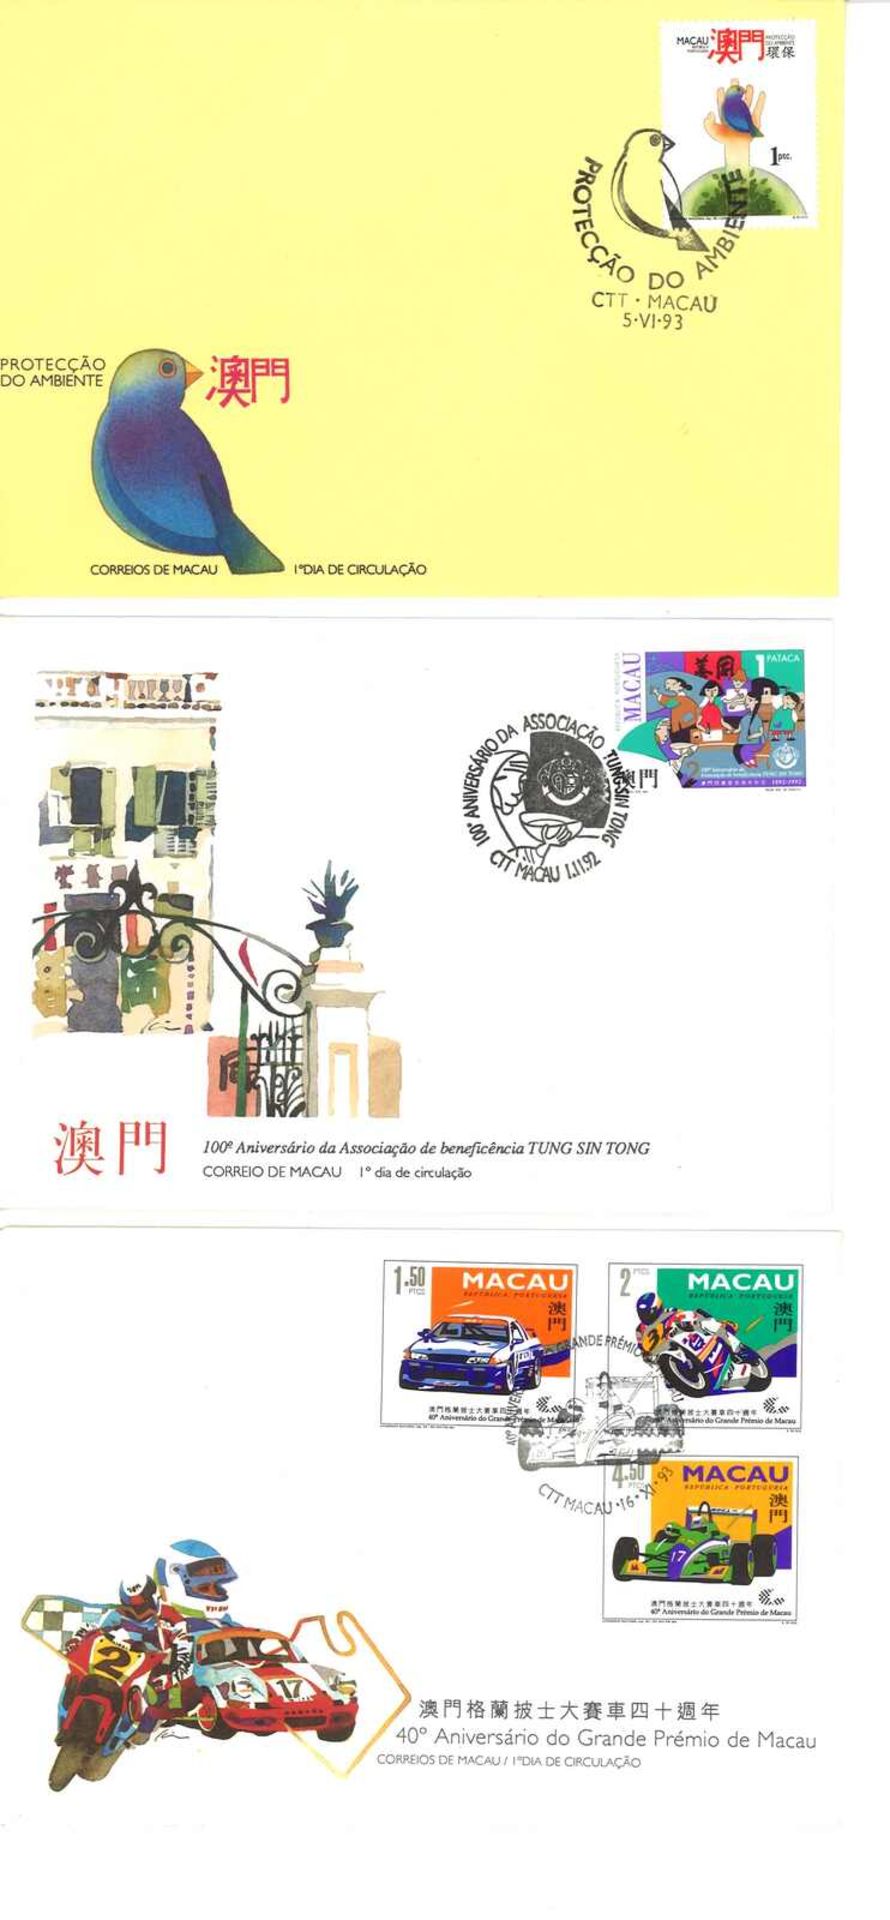 7 FDC´s Macau 1993/92, Top-Zustand.7 FDCs Macau 1993/92, excellent condition. - Image 2 of 2